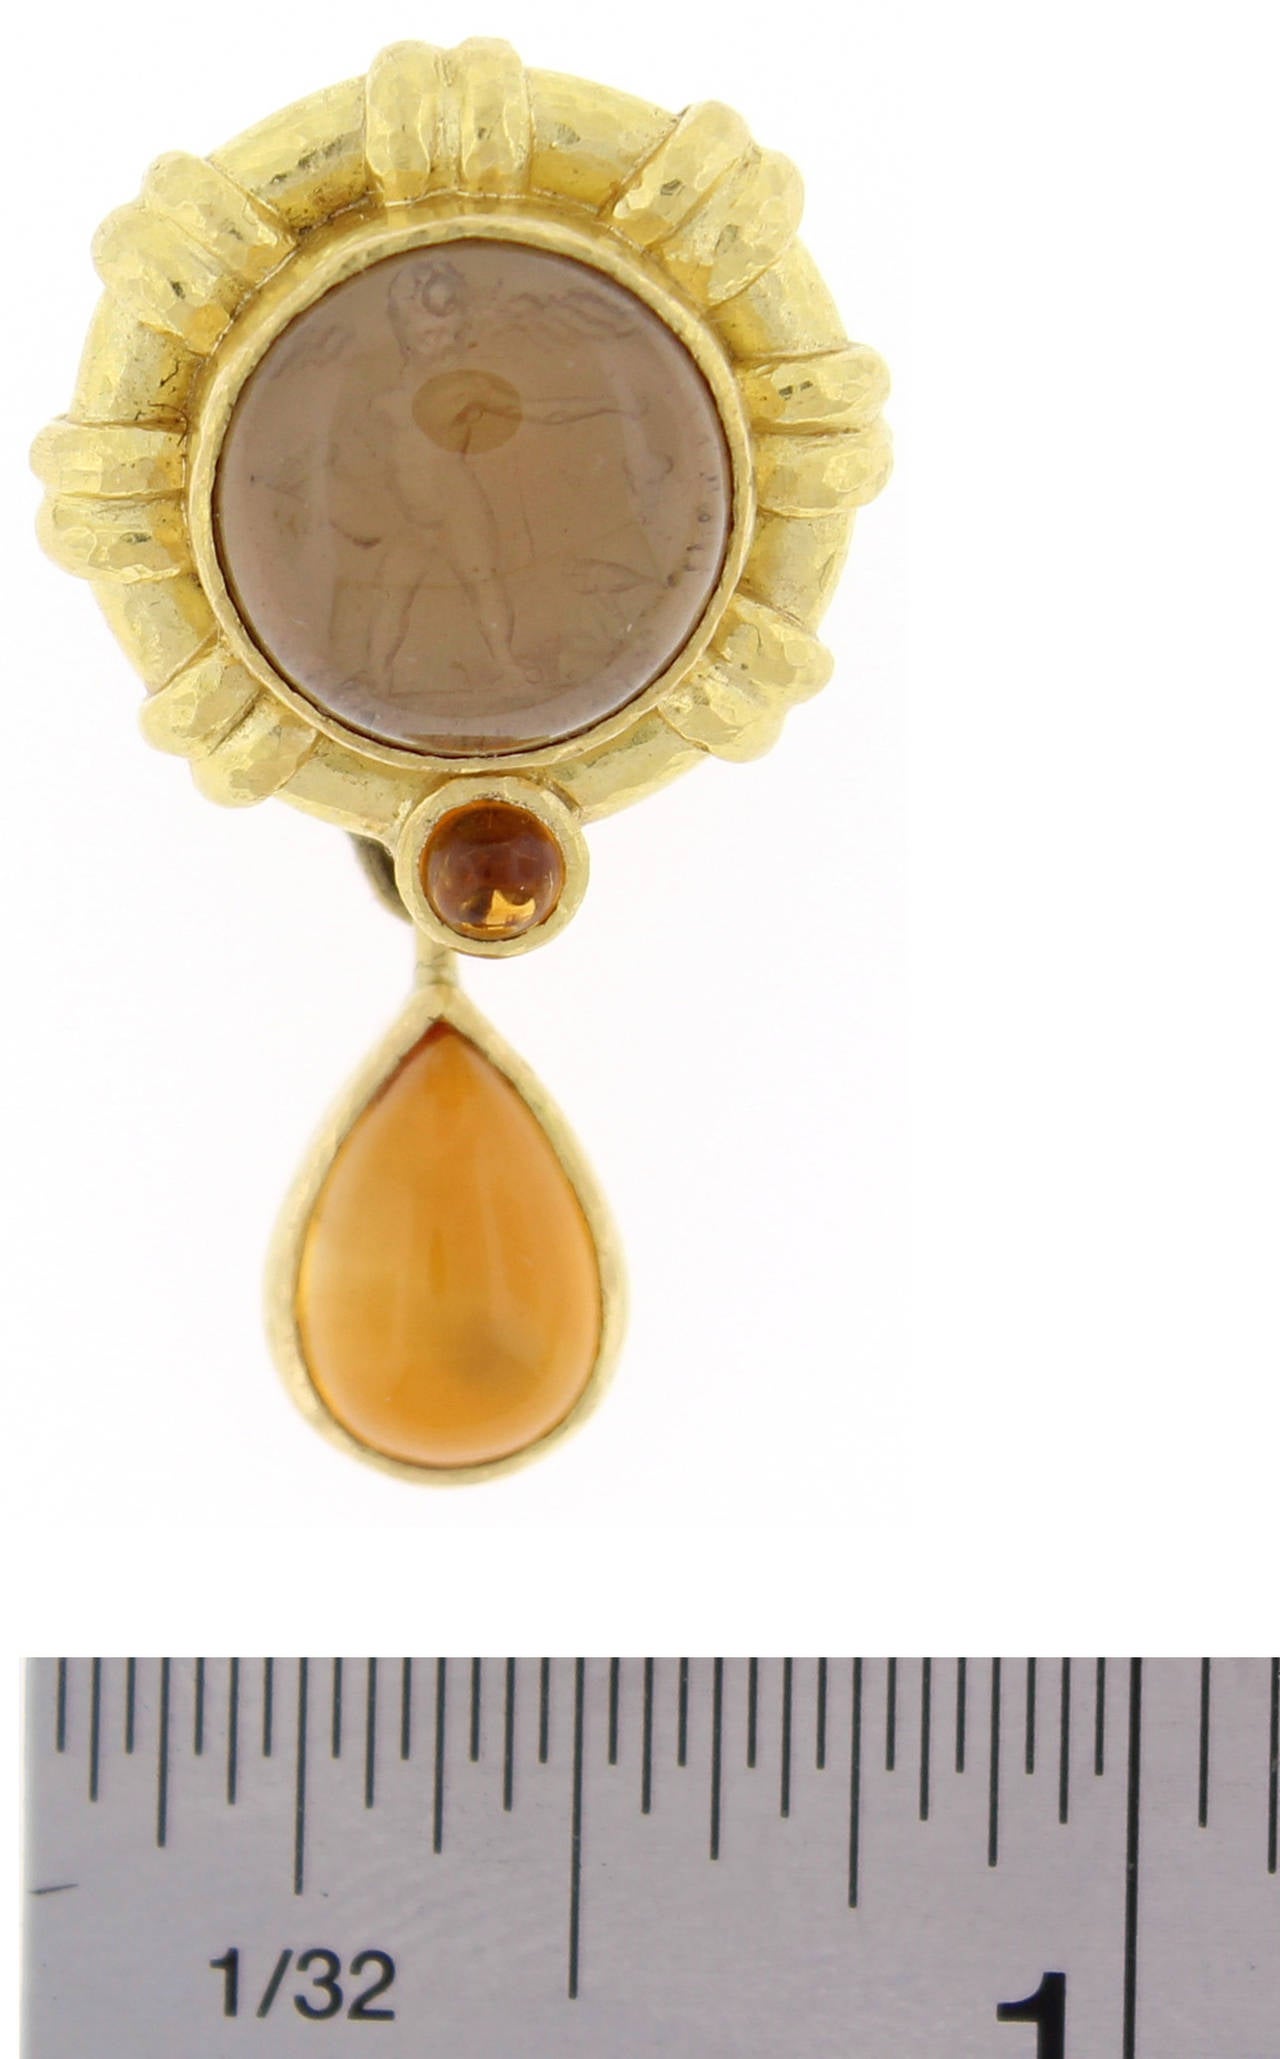 19 Karat venetian glass intaglio over mother of pearl and citrine drop earrings by Elizabeth Locke. The posts fold away allowing the earrings to be worn as clips or for pierced ears